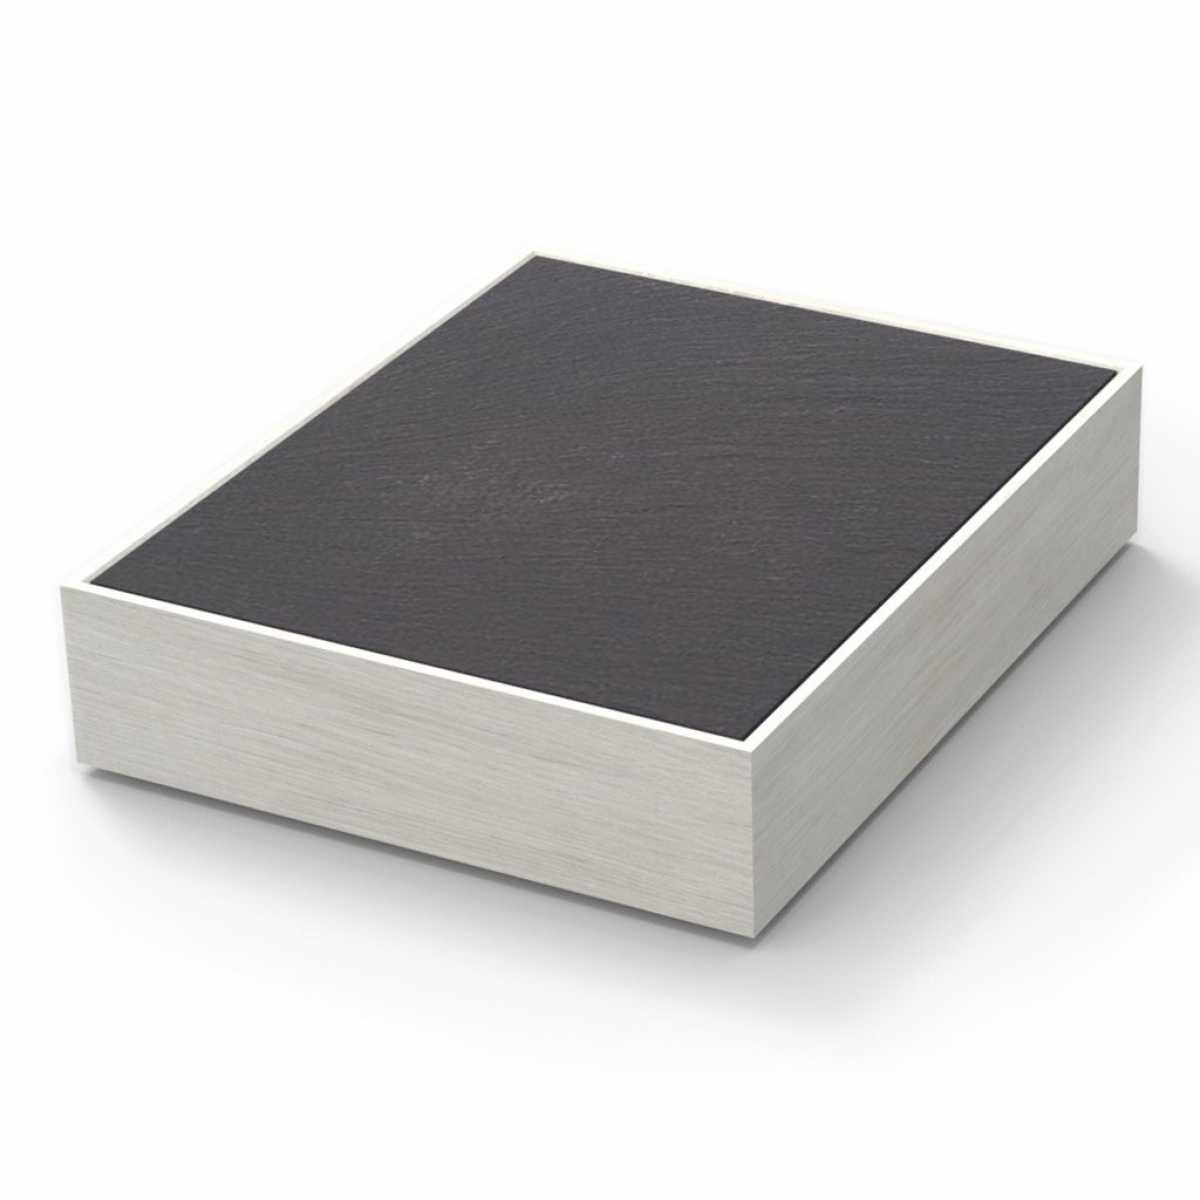 CRASTER Flow White-Washed Slate Cooling Tray 1.2